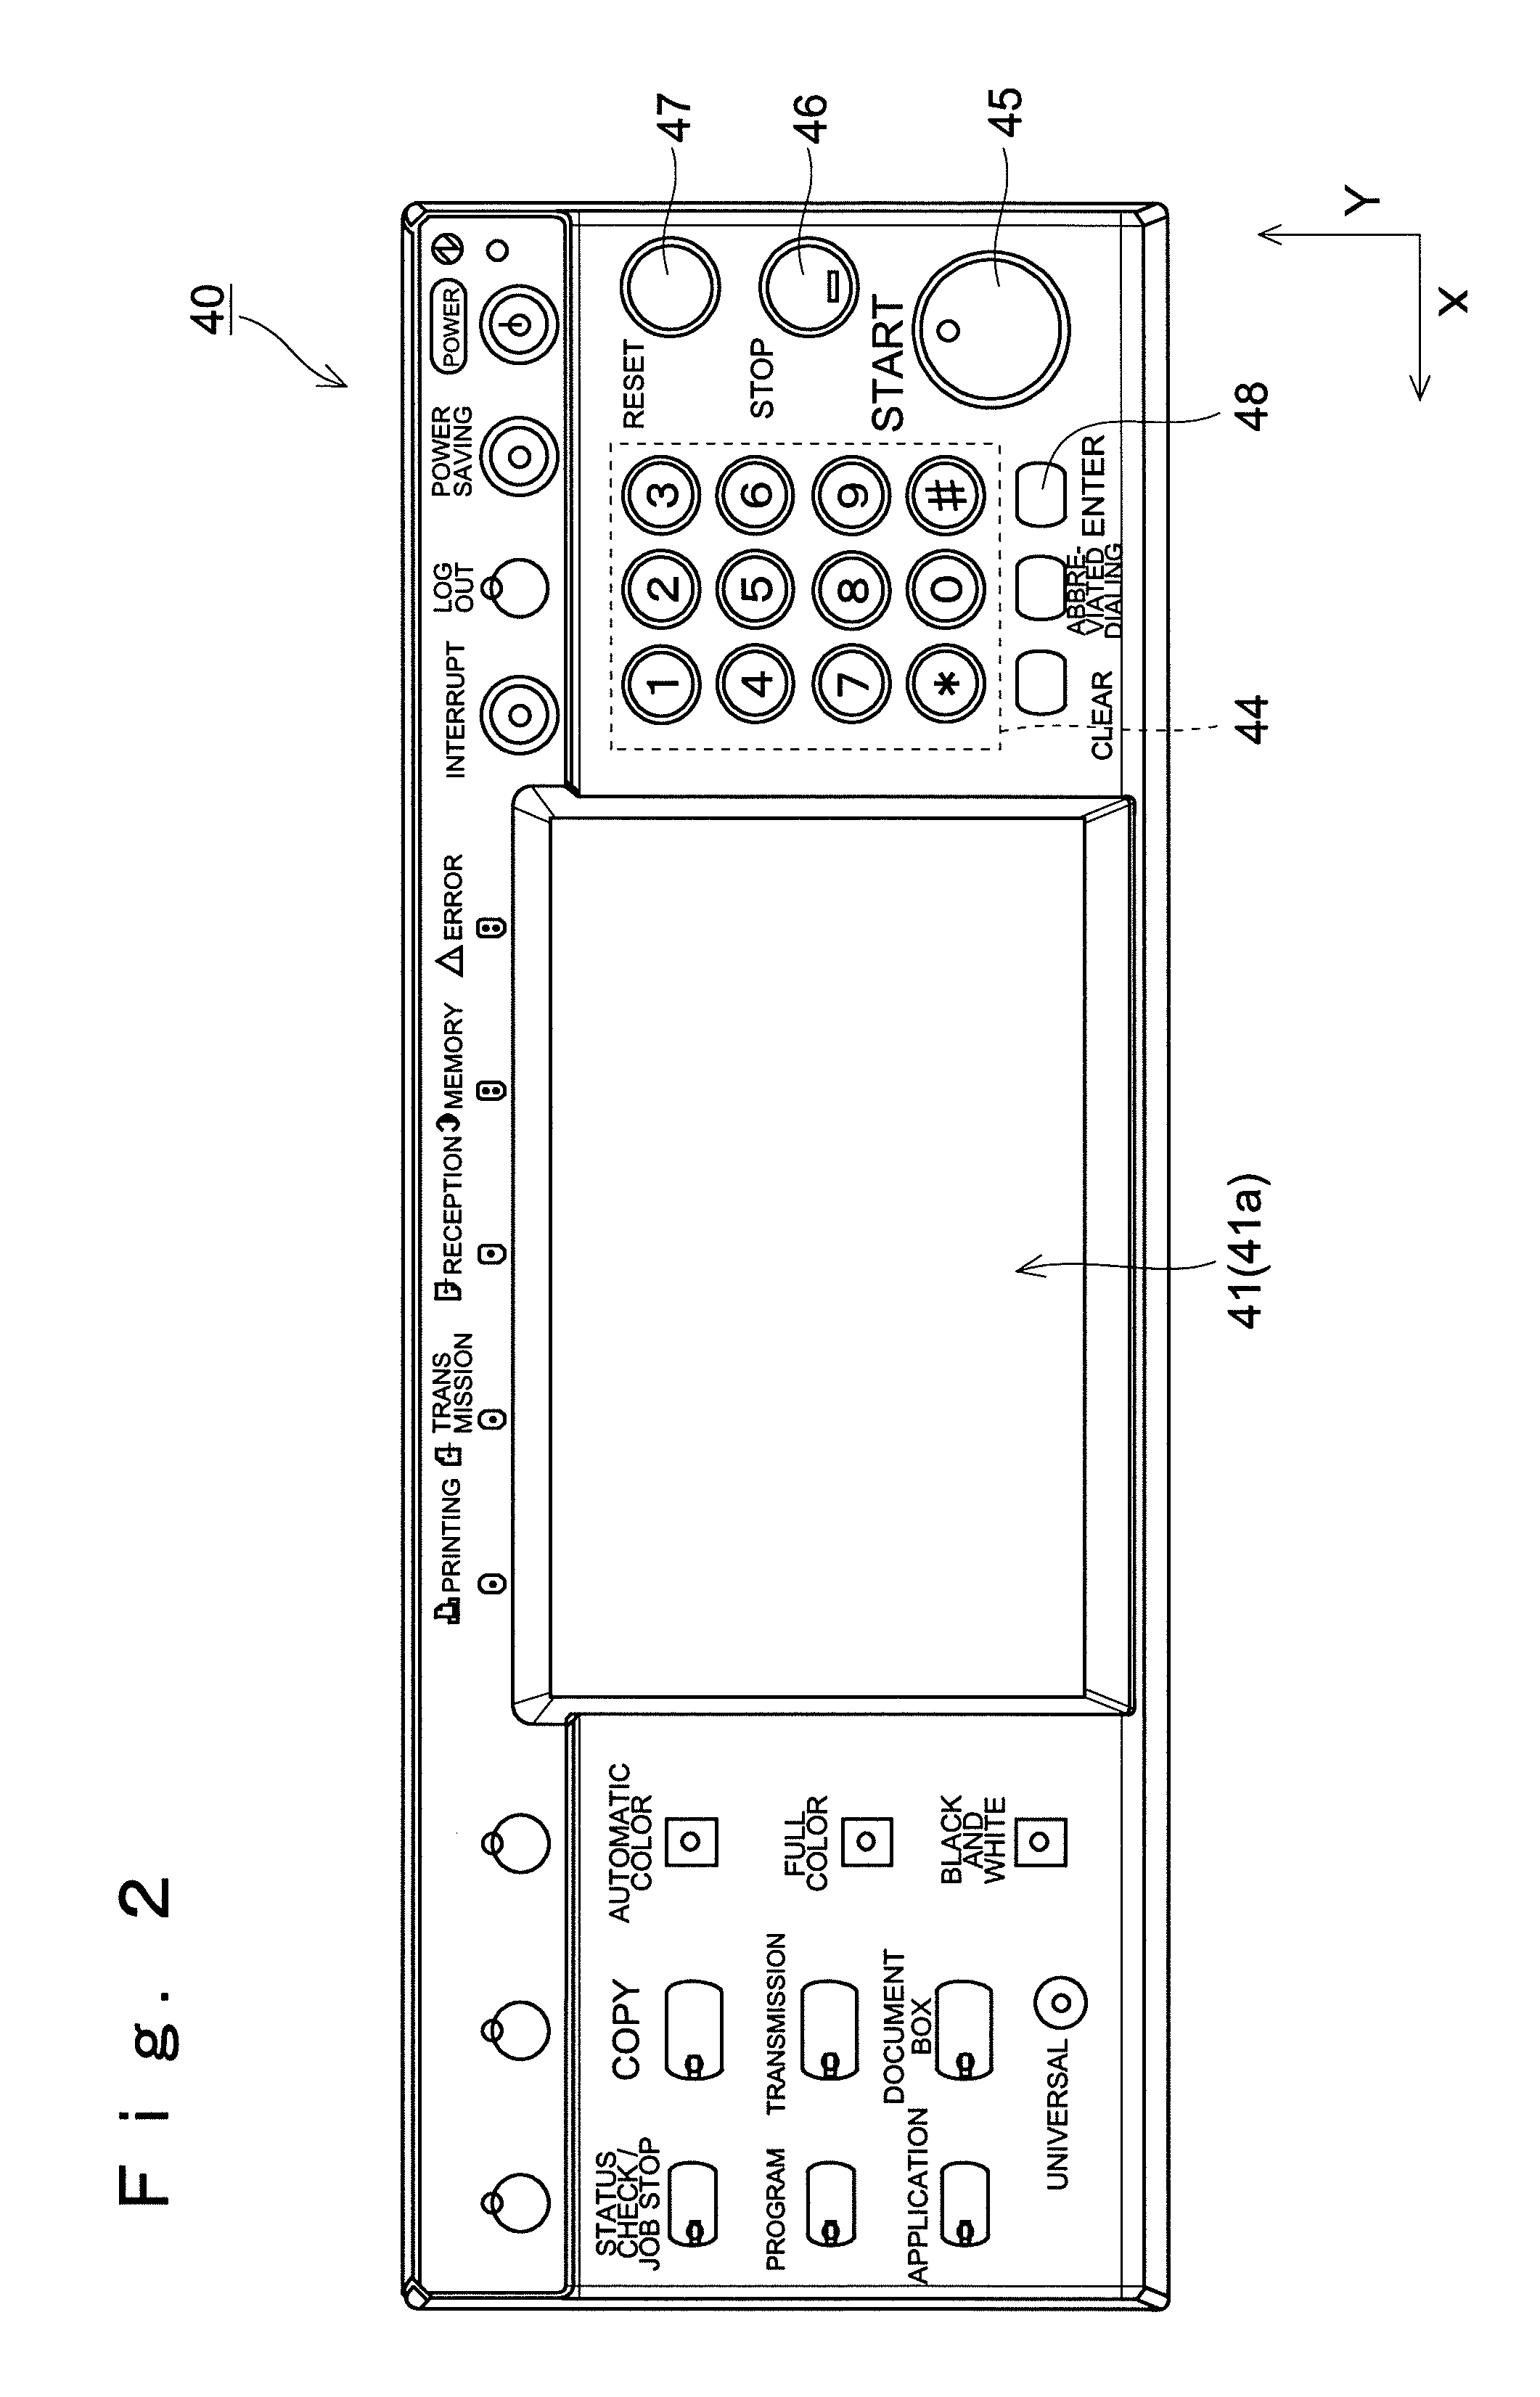 Image forming apparatus and display method using operation display portion thereof